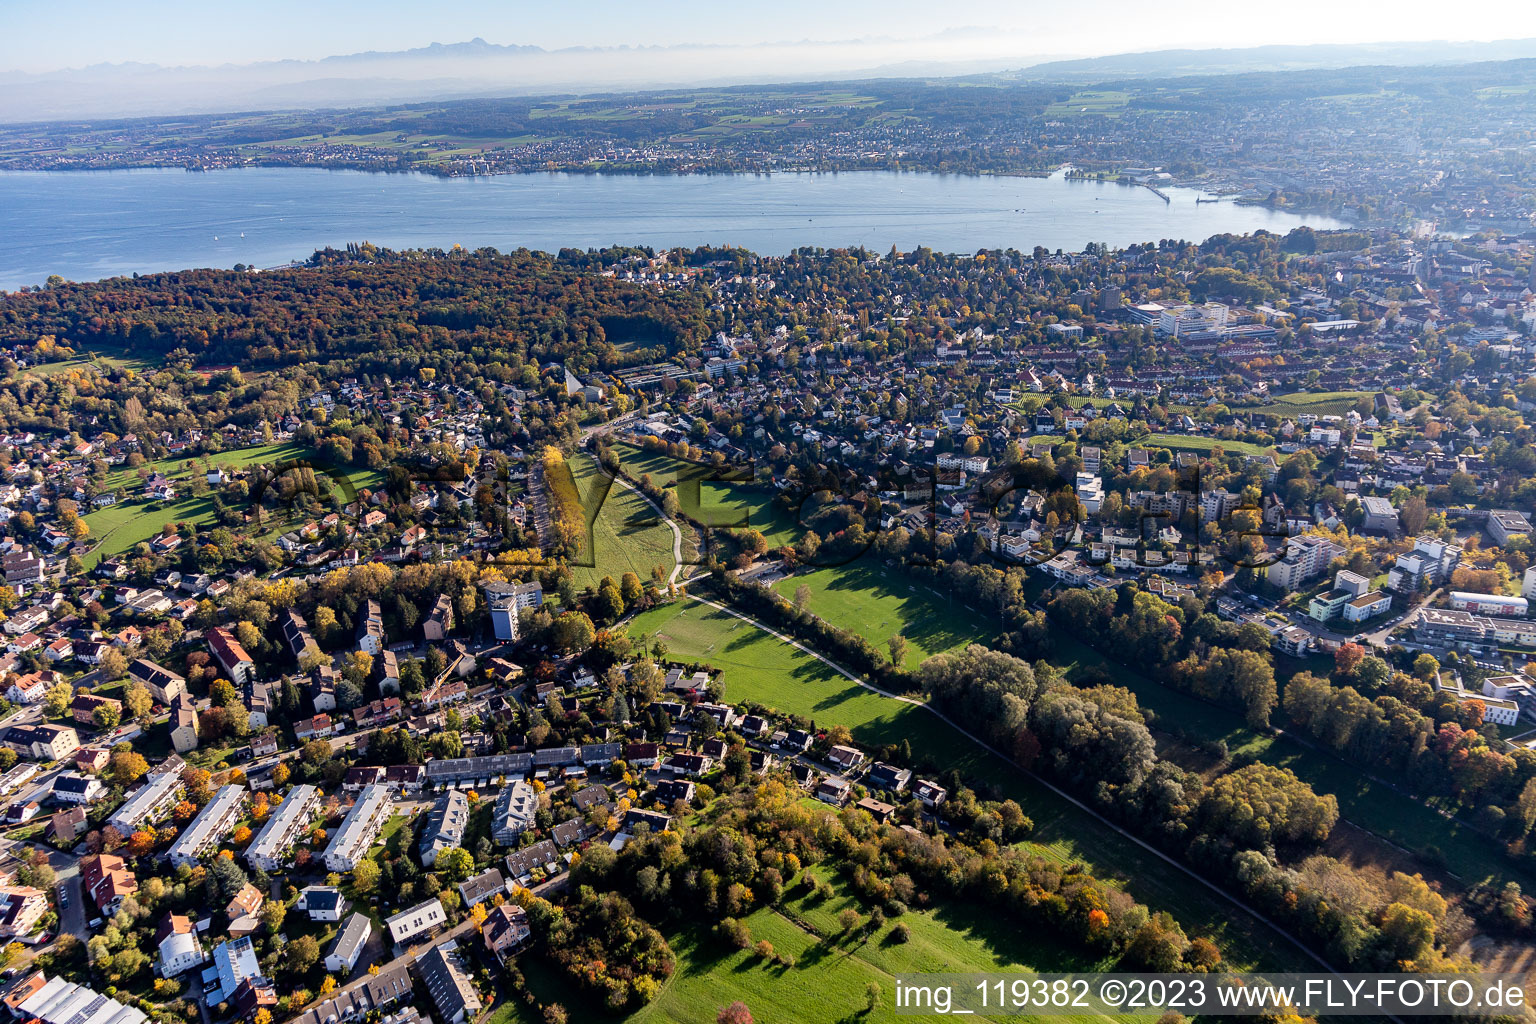 The district Petershausen East in Konstanz in the state Baden-Wurttemberg, Germany